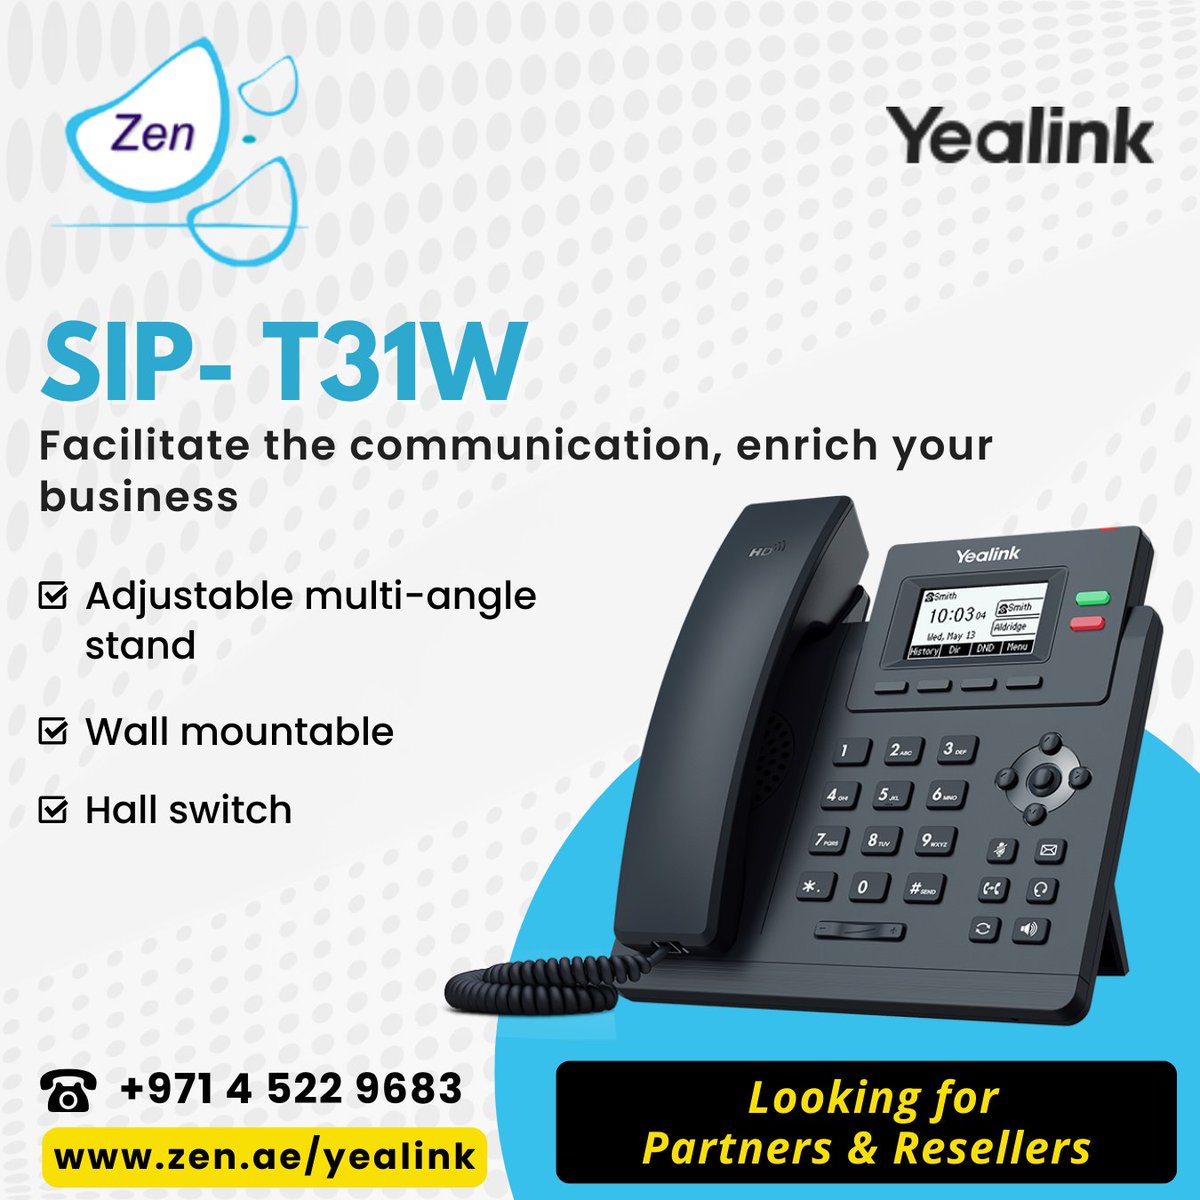 #yealink  SIP- T31W
Facilitate the communication, enrich your business
Looking for partners & resellers.

smpl.is/8l1at

#3cx #zenitdxb #zenit #businesscommunication #dubaistartup #3cxhosting #simhosting #saudistartups